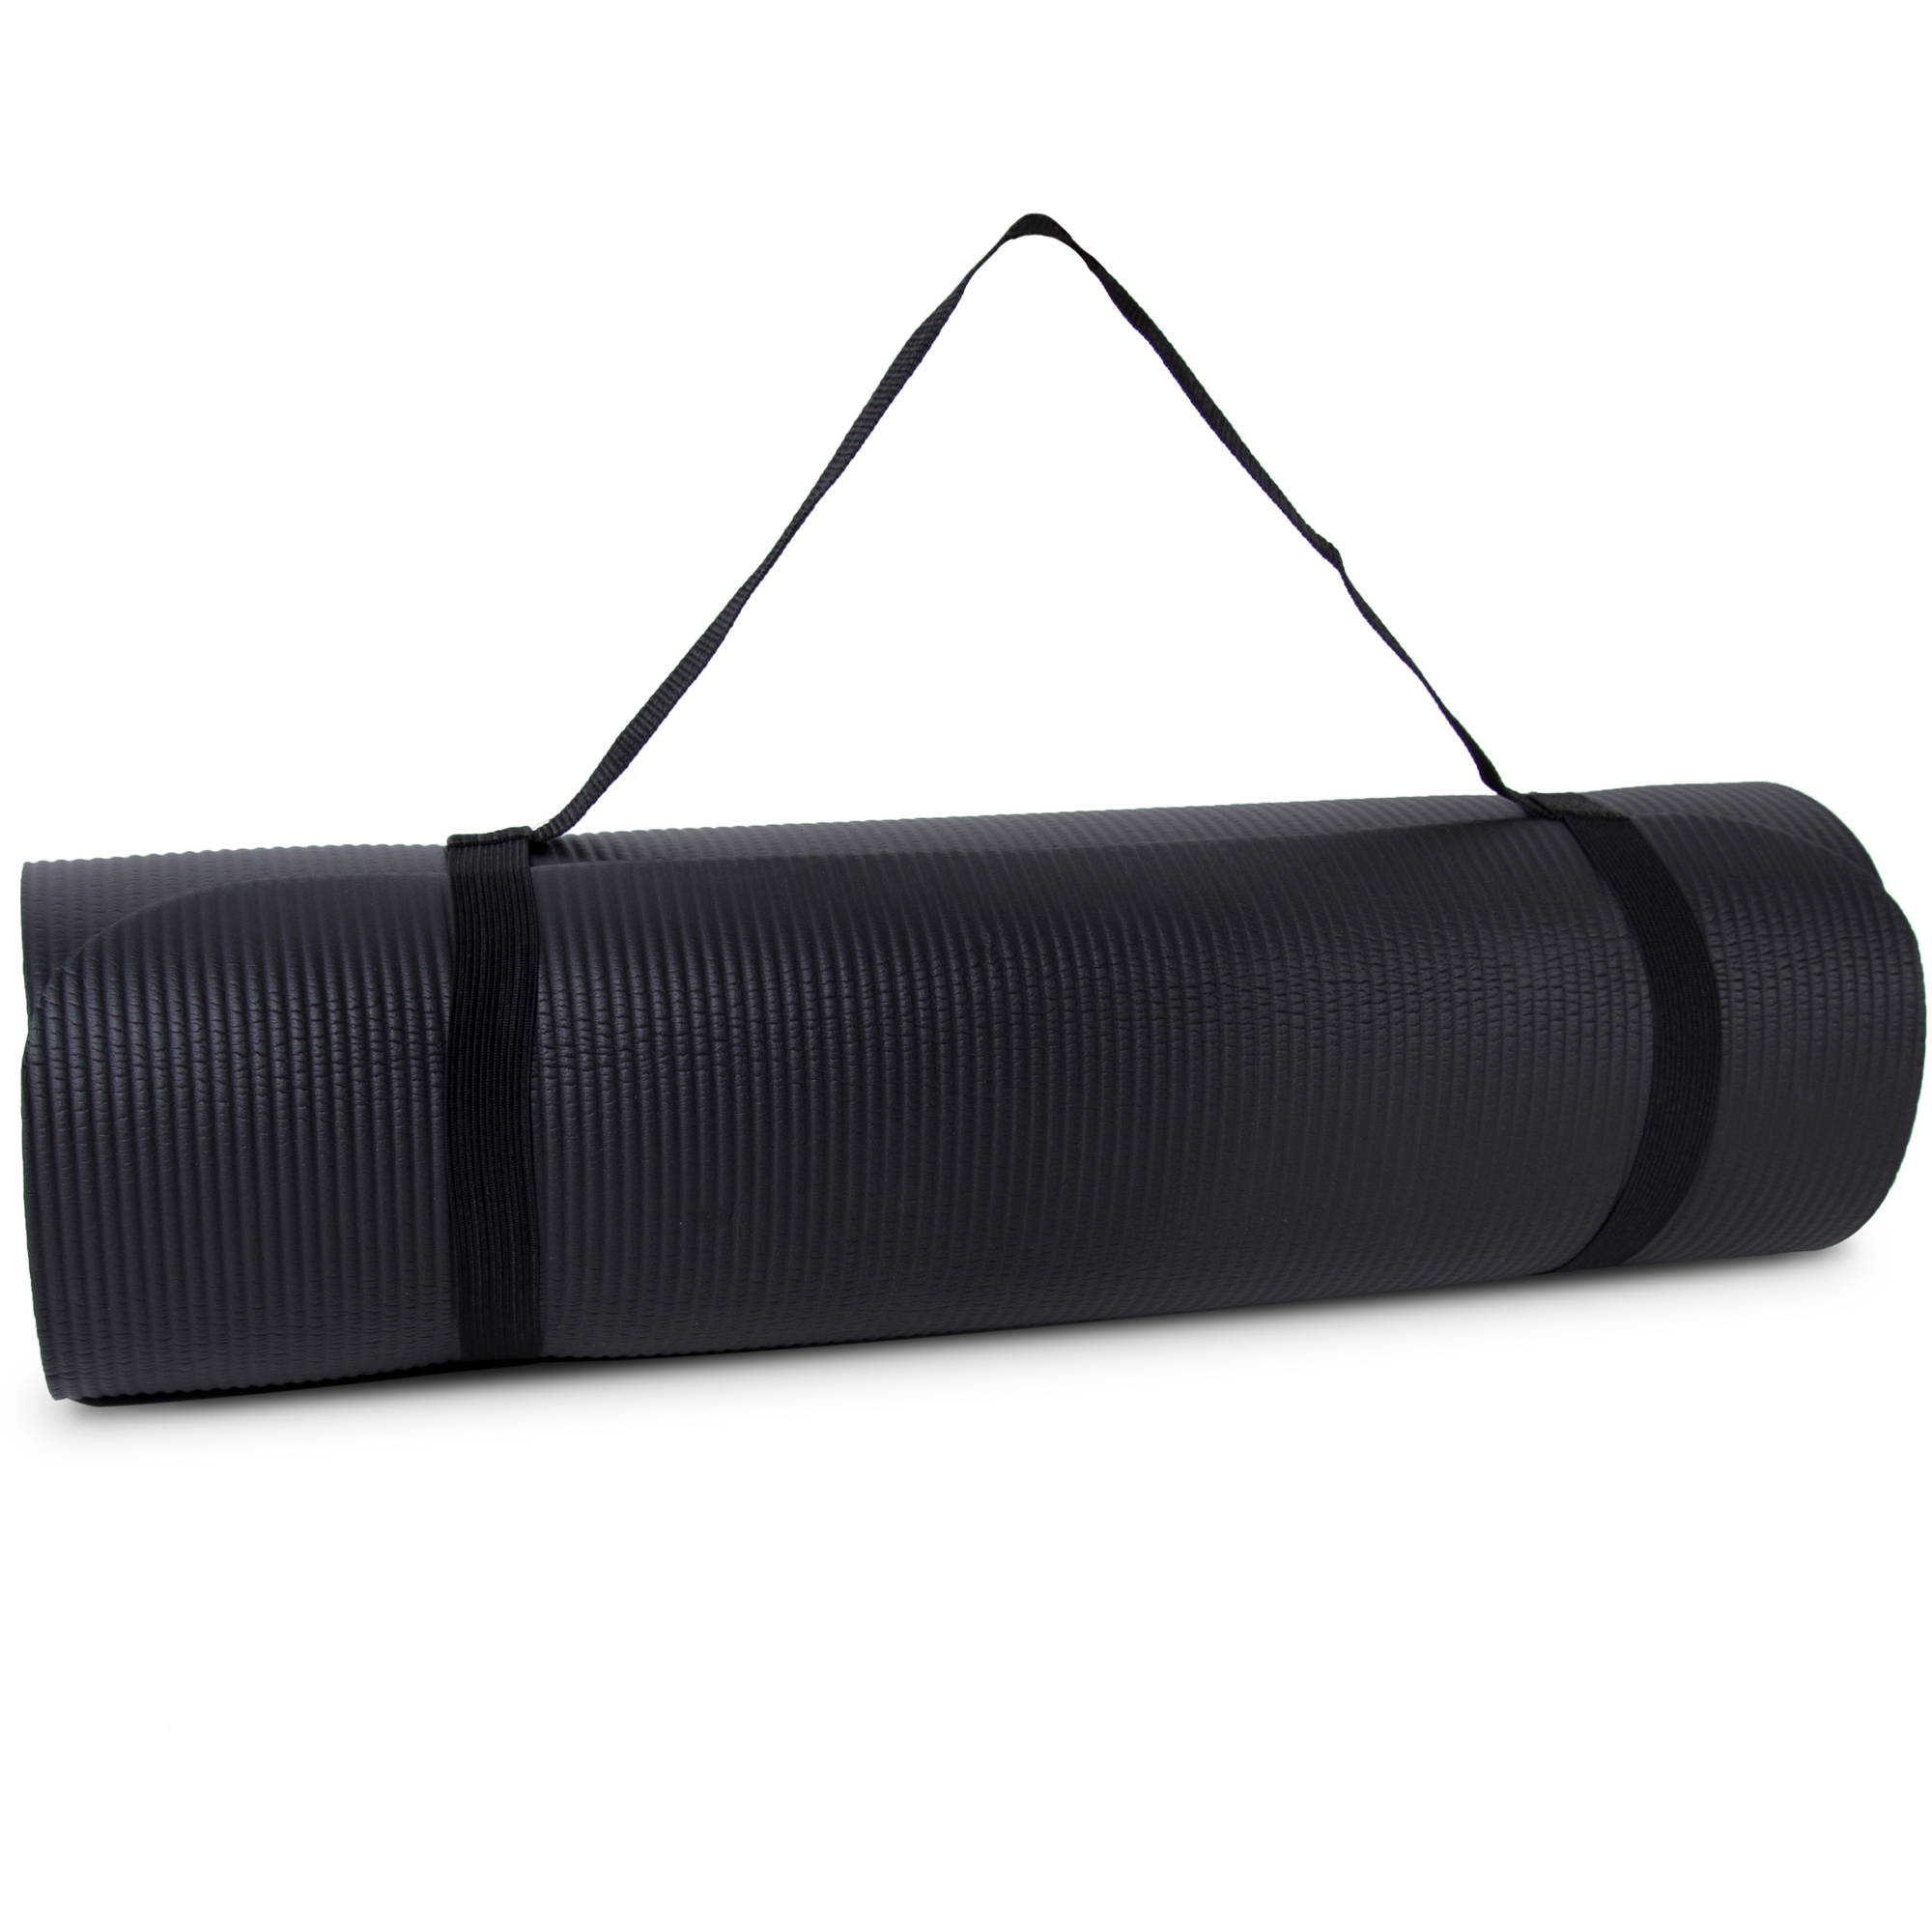 Tone Fitness NBR High Density Yoga Exercise Mat with Carry Strap, Black - image 1 of 5